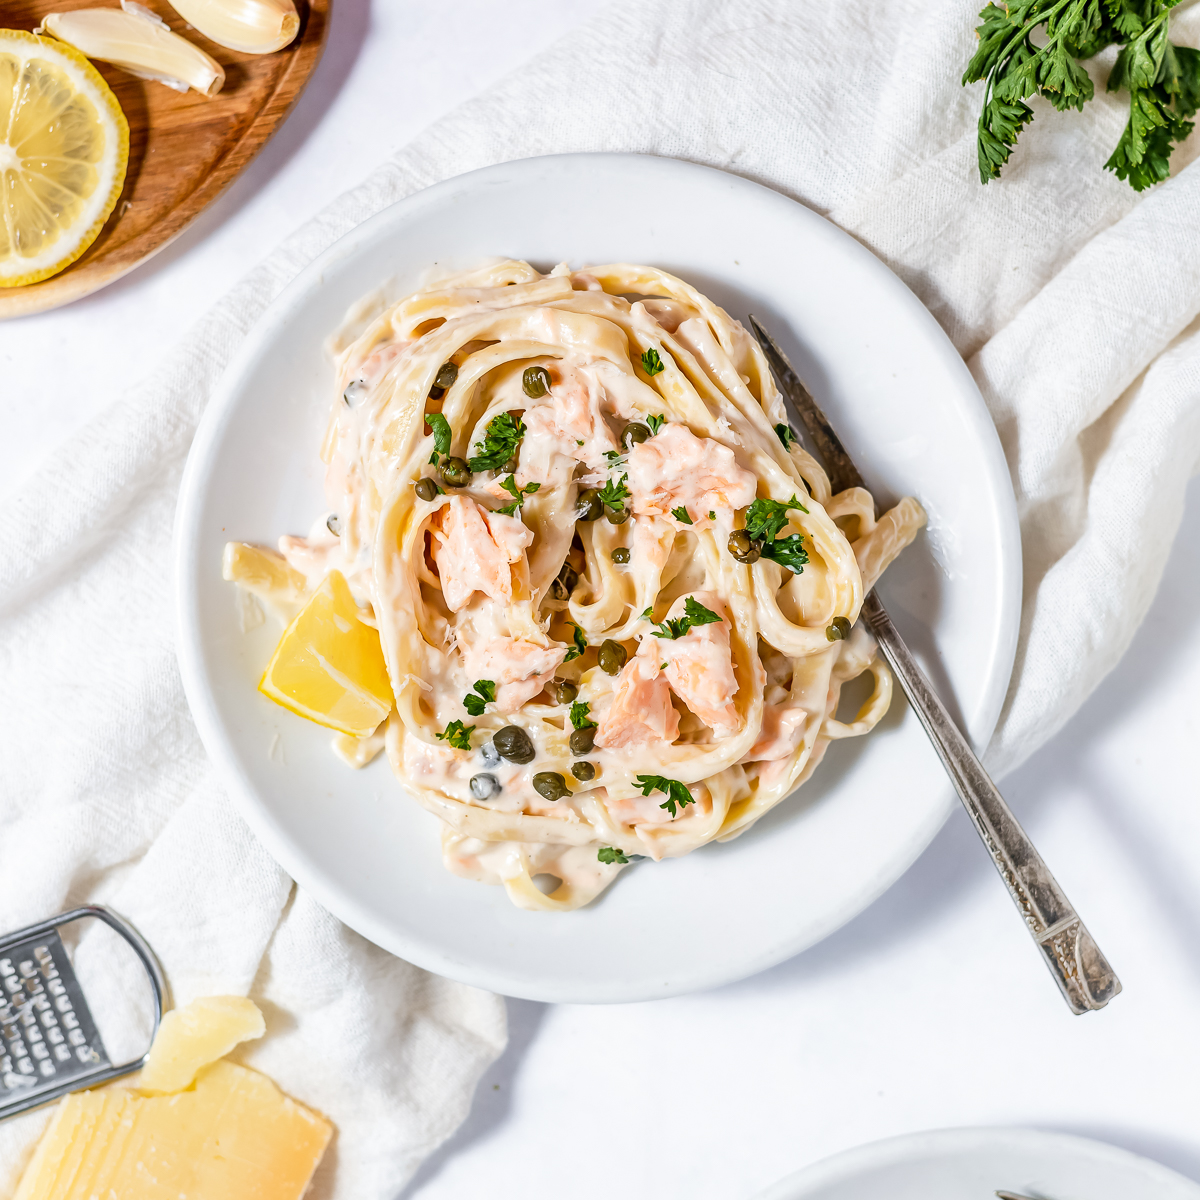 White round bowl of creamy fettuccine with pink pieces of salmon, dark green capers, chopped parsley sprinkled over and a small wedge of lemon beside.